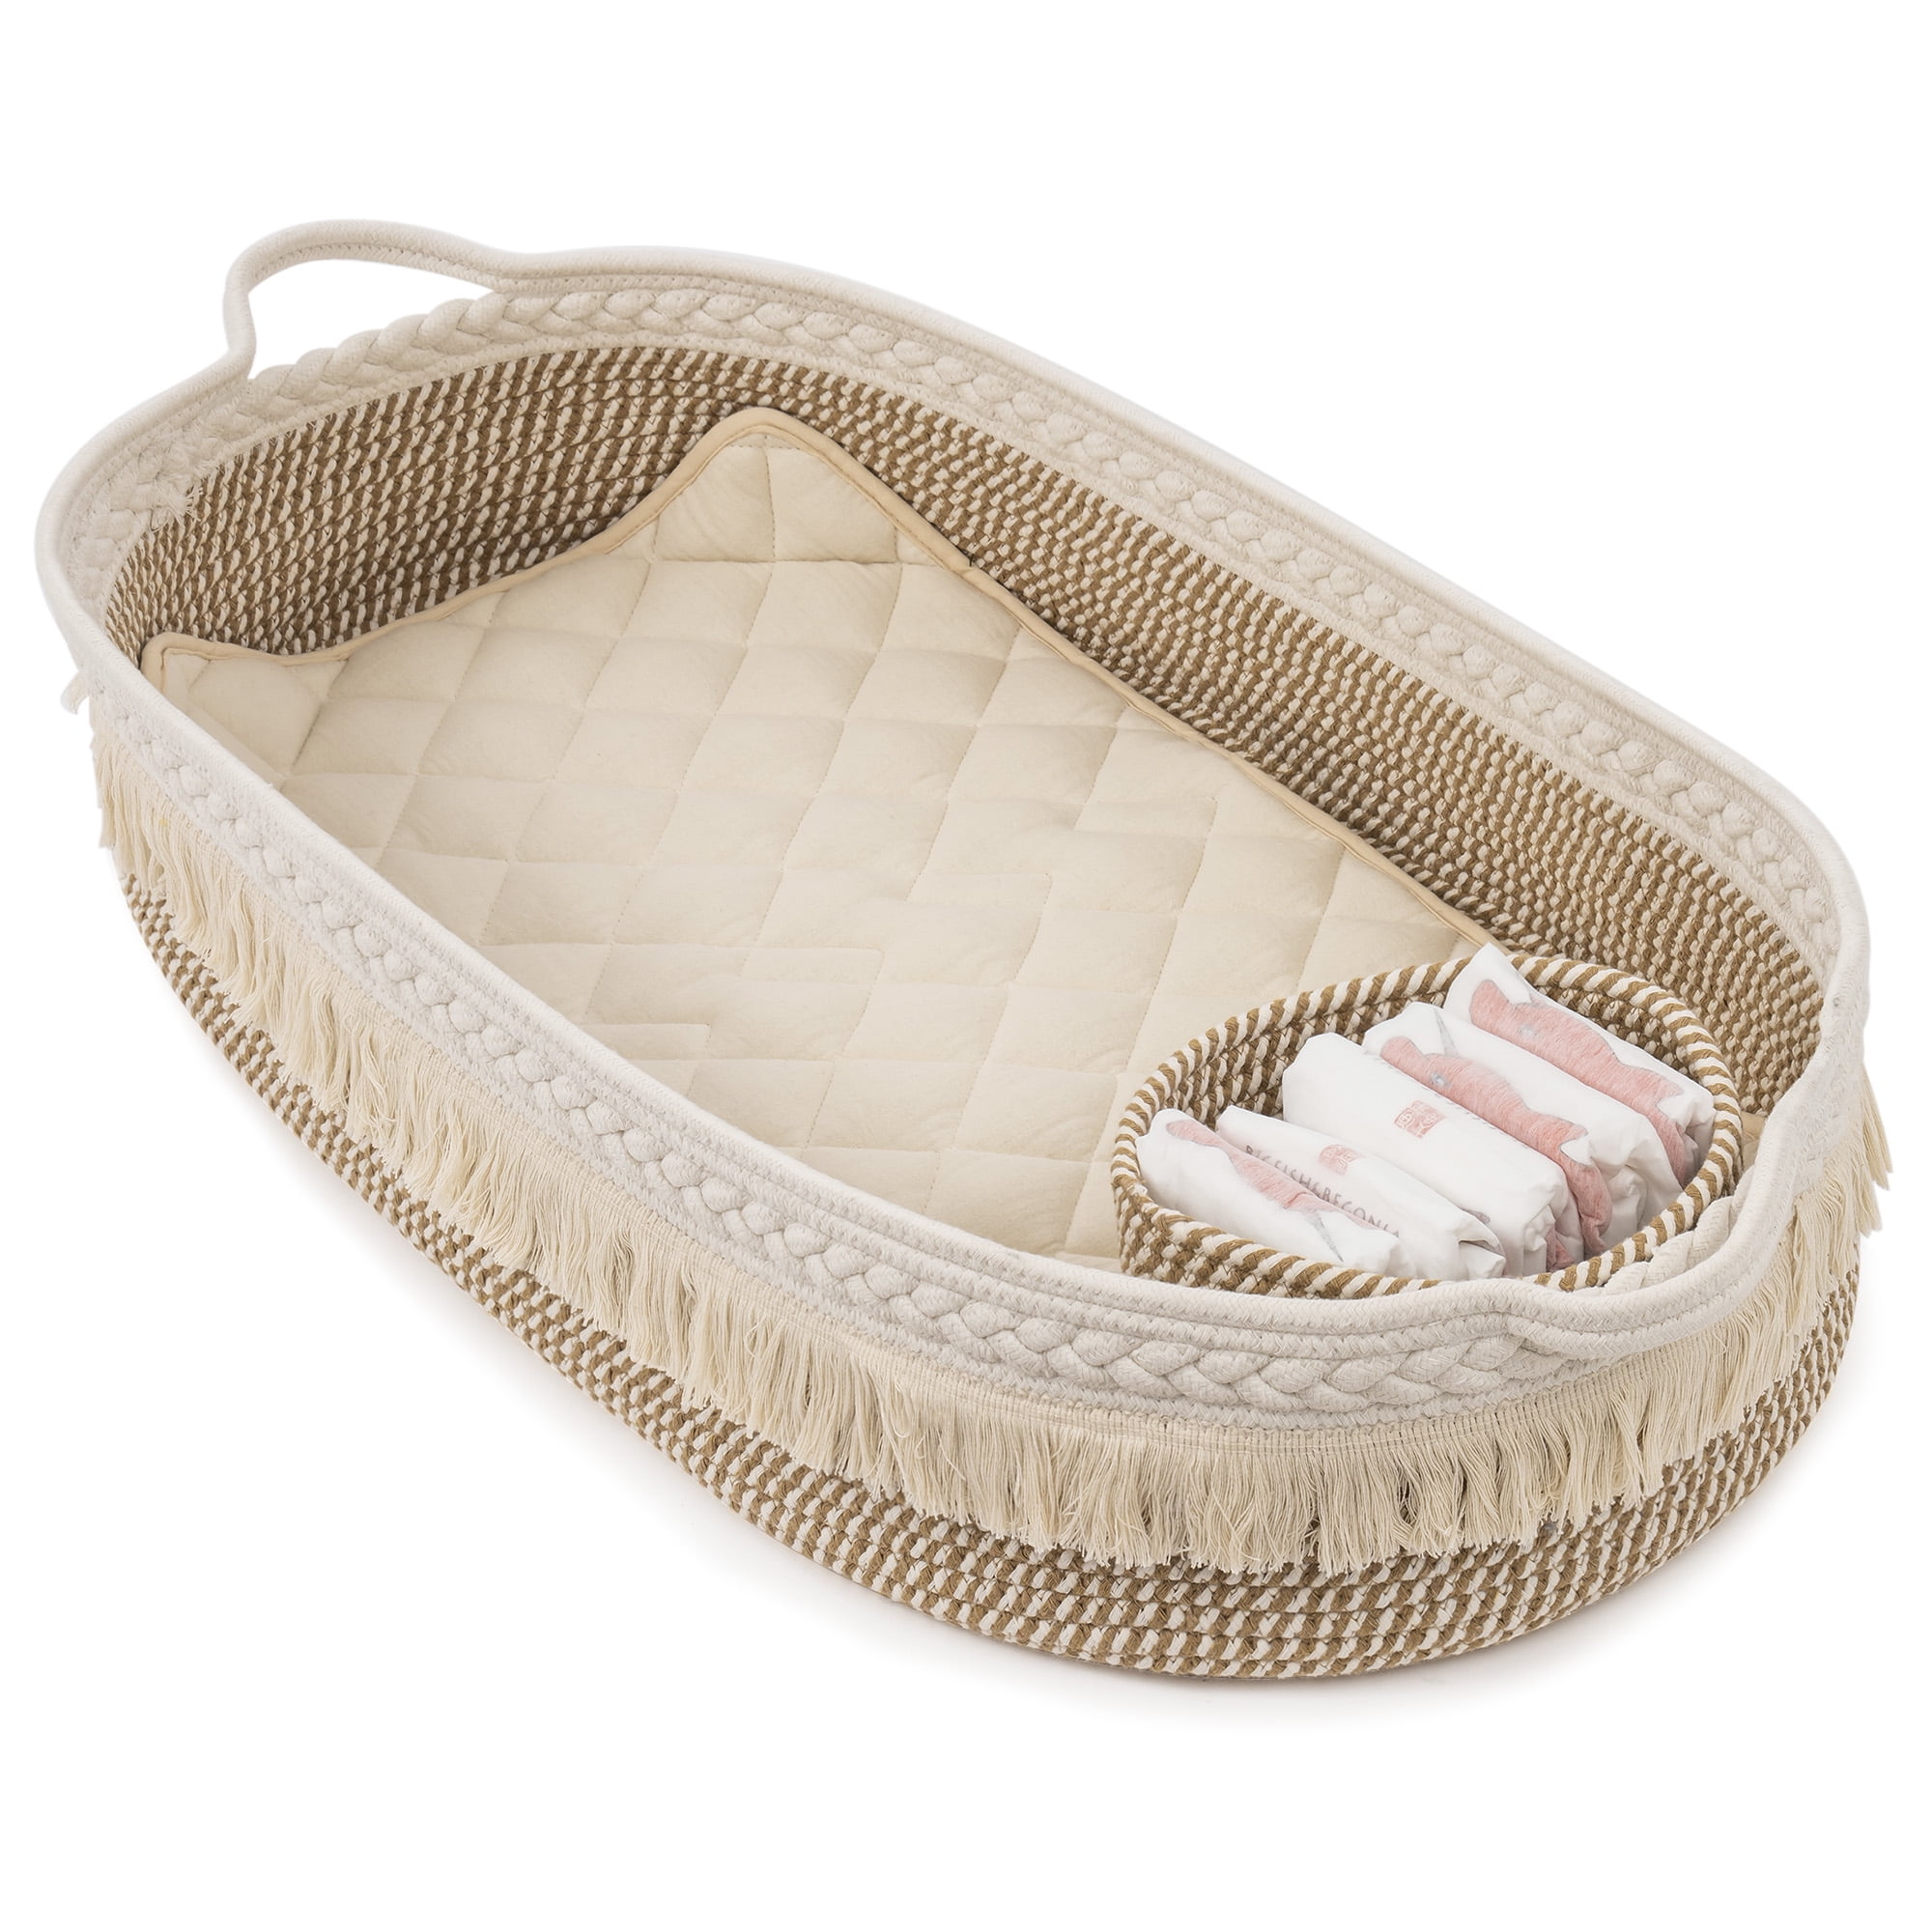 UBBCARE Baby Changing Basket, Cotton Rope Moses Basket for Newborn, Foam  Pad Changing Basket with Waterproof Cover, Unisex Changing Table Topper for